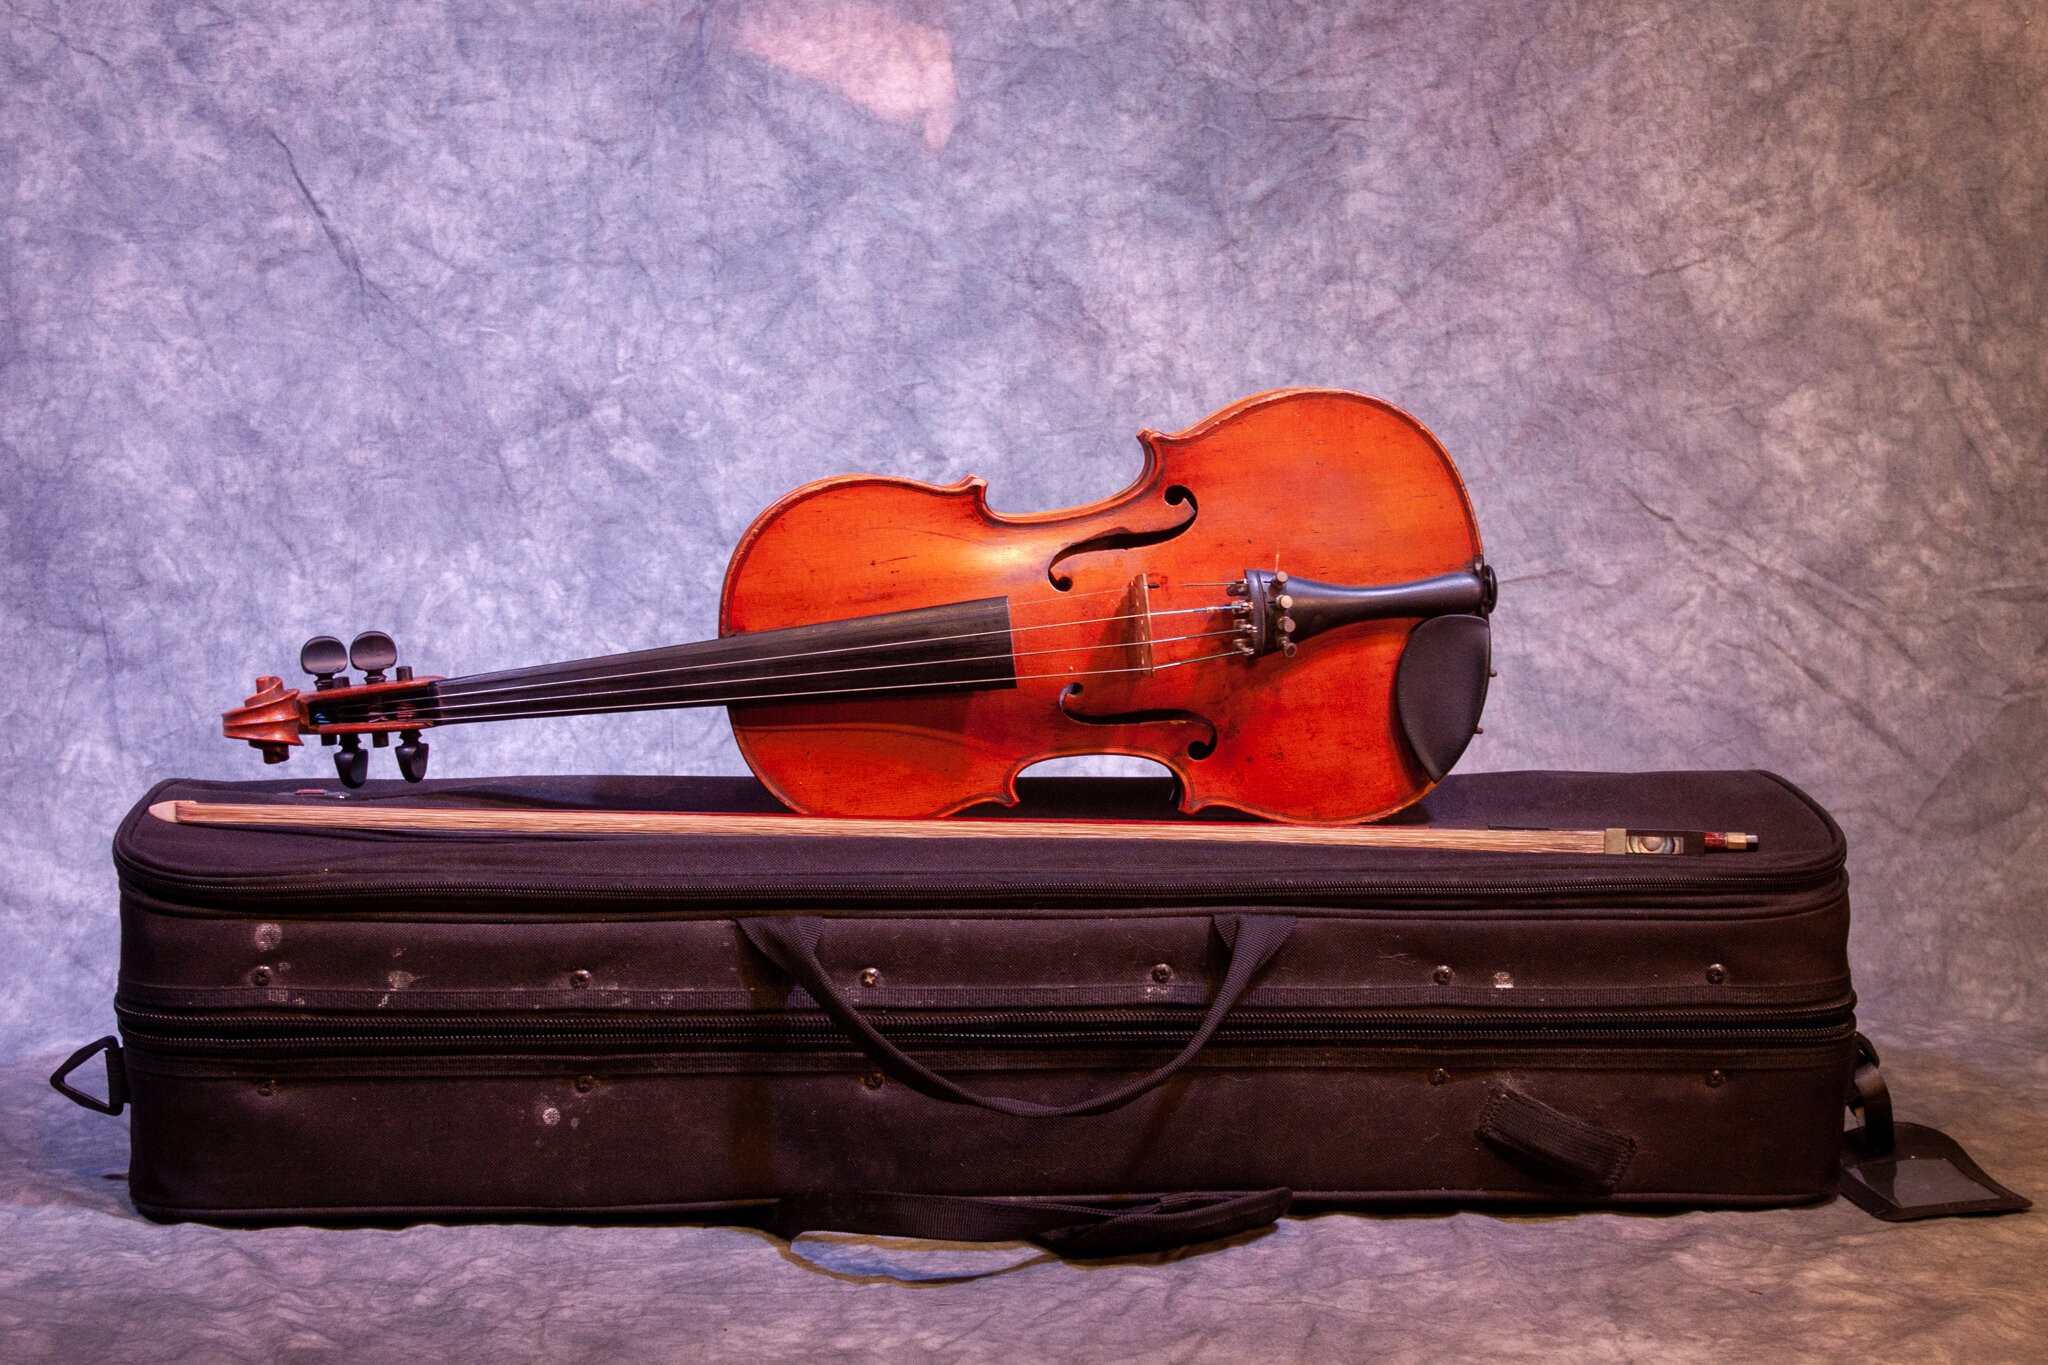 Pete Sutherland's Fiddle